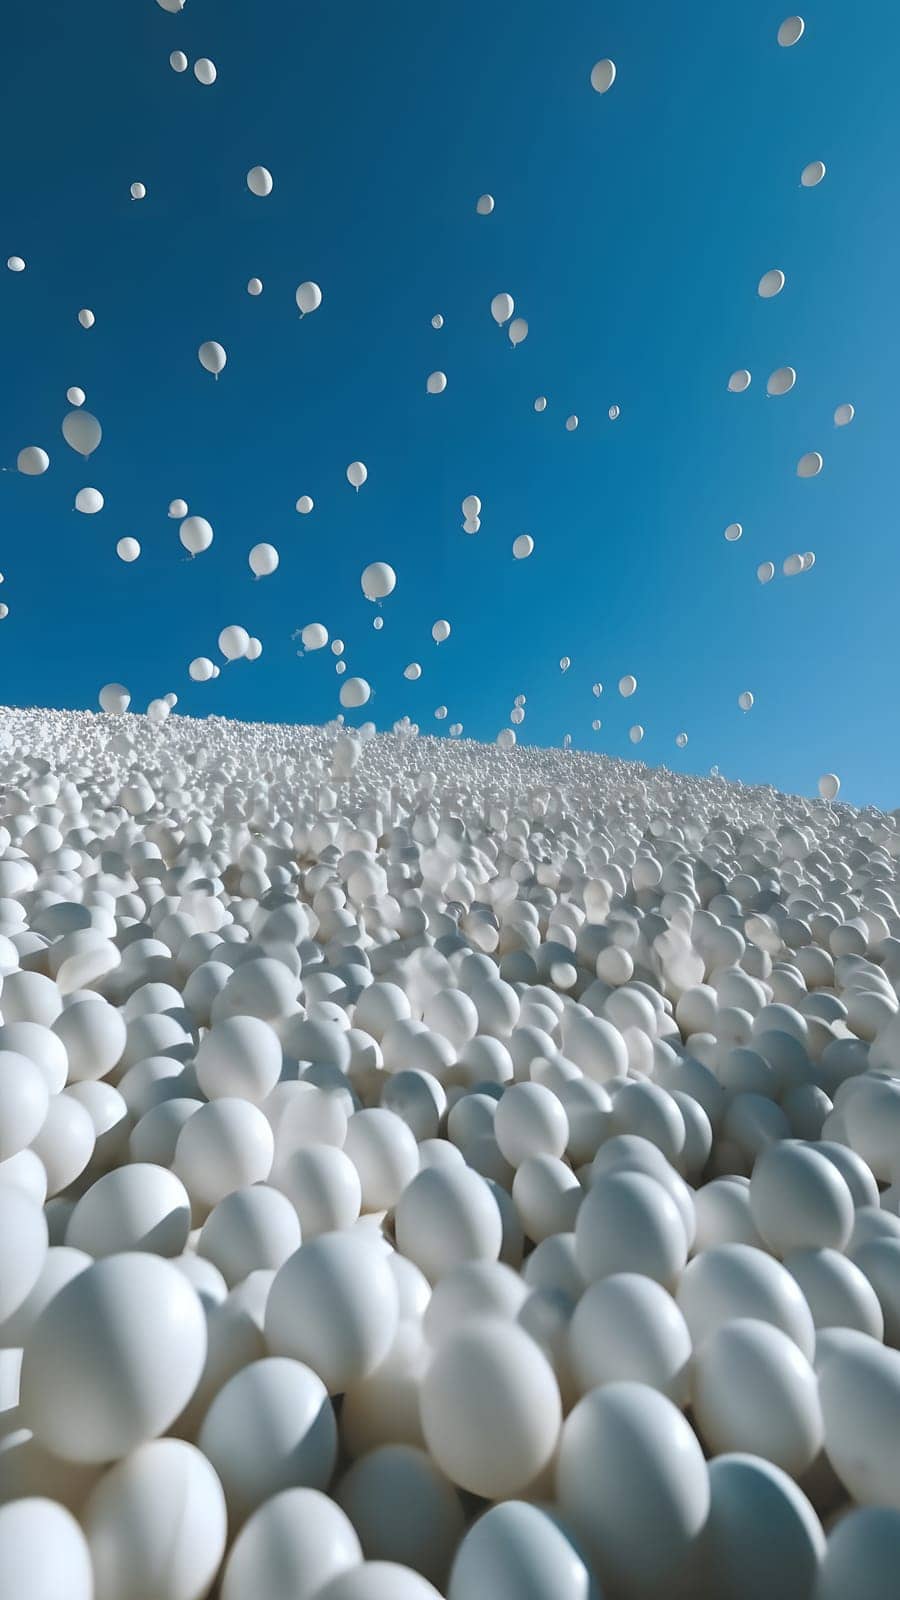 many soft white balls on blue sky background, minimalistic wallpaper. Neural network generated in May 2023. Not based on any actual person, scene or pattern.